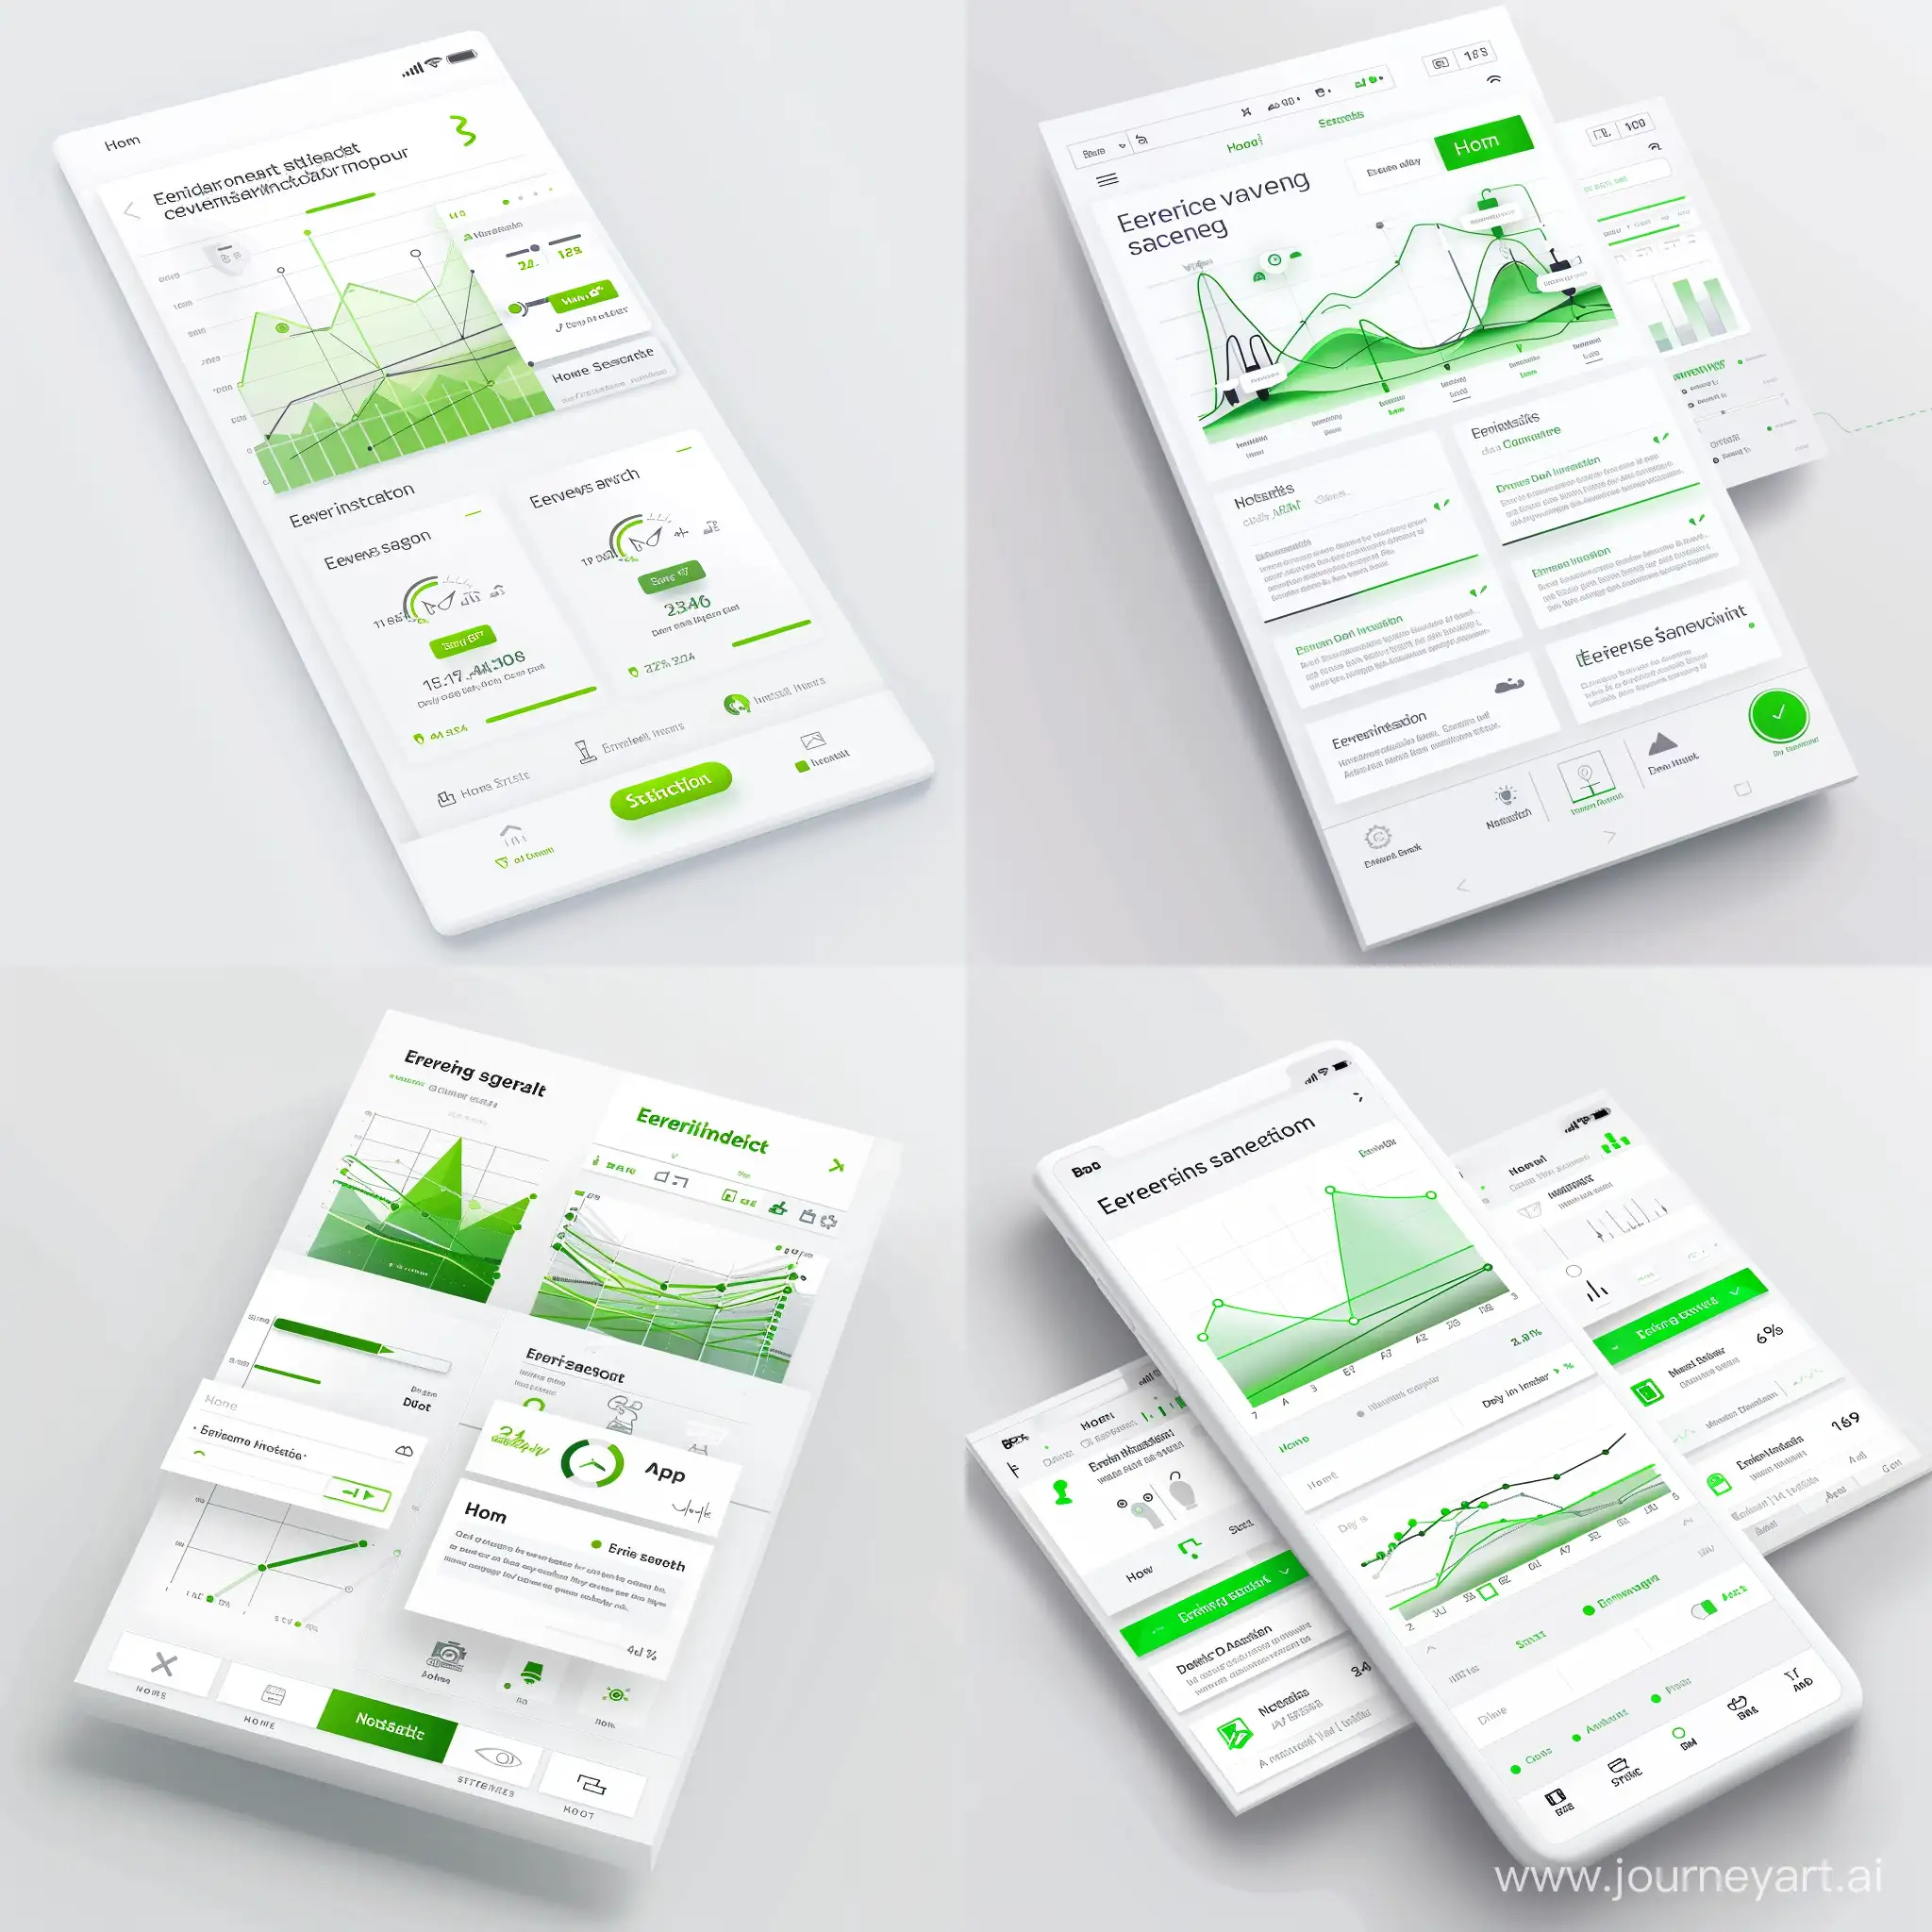 Imagine a minimalist home screen for a smart energy management app. The background should be white or light gray, with a clean, card-based layout. Include a dynamic energy consumption graph as the centerpiece, showcasing daily energy usage with green accents. Around the graph, place cards displaying key metrics like "Energy Savings" and "System Status," each with readable sans-serif text and simple icons representing energy sources and devices. Ensure the bottom navigation bar includes intuitive icons for Home, Energy Insights, Settings, and Notifications, highlighted in green for active status.UI Design style